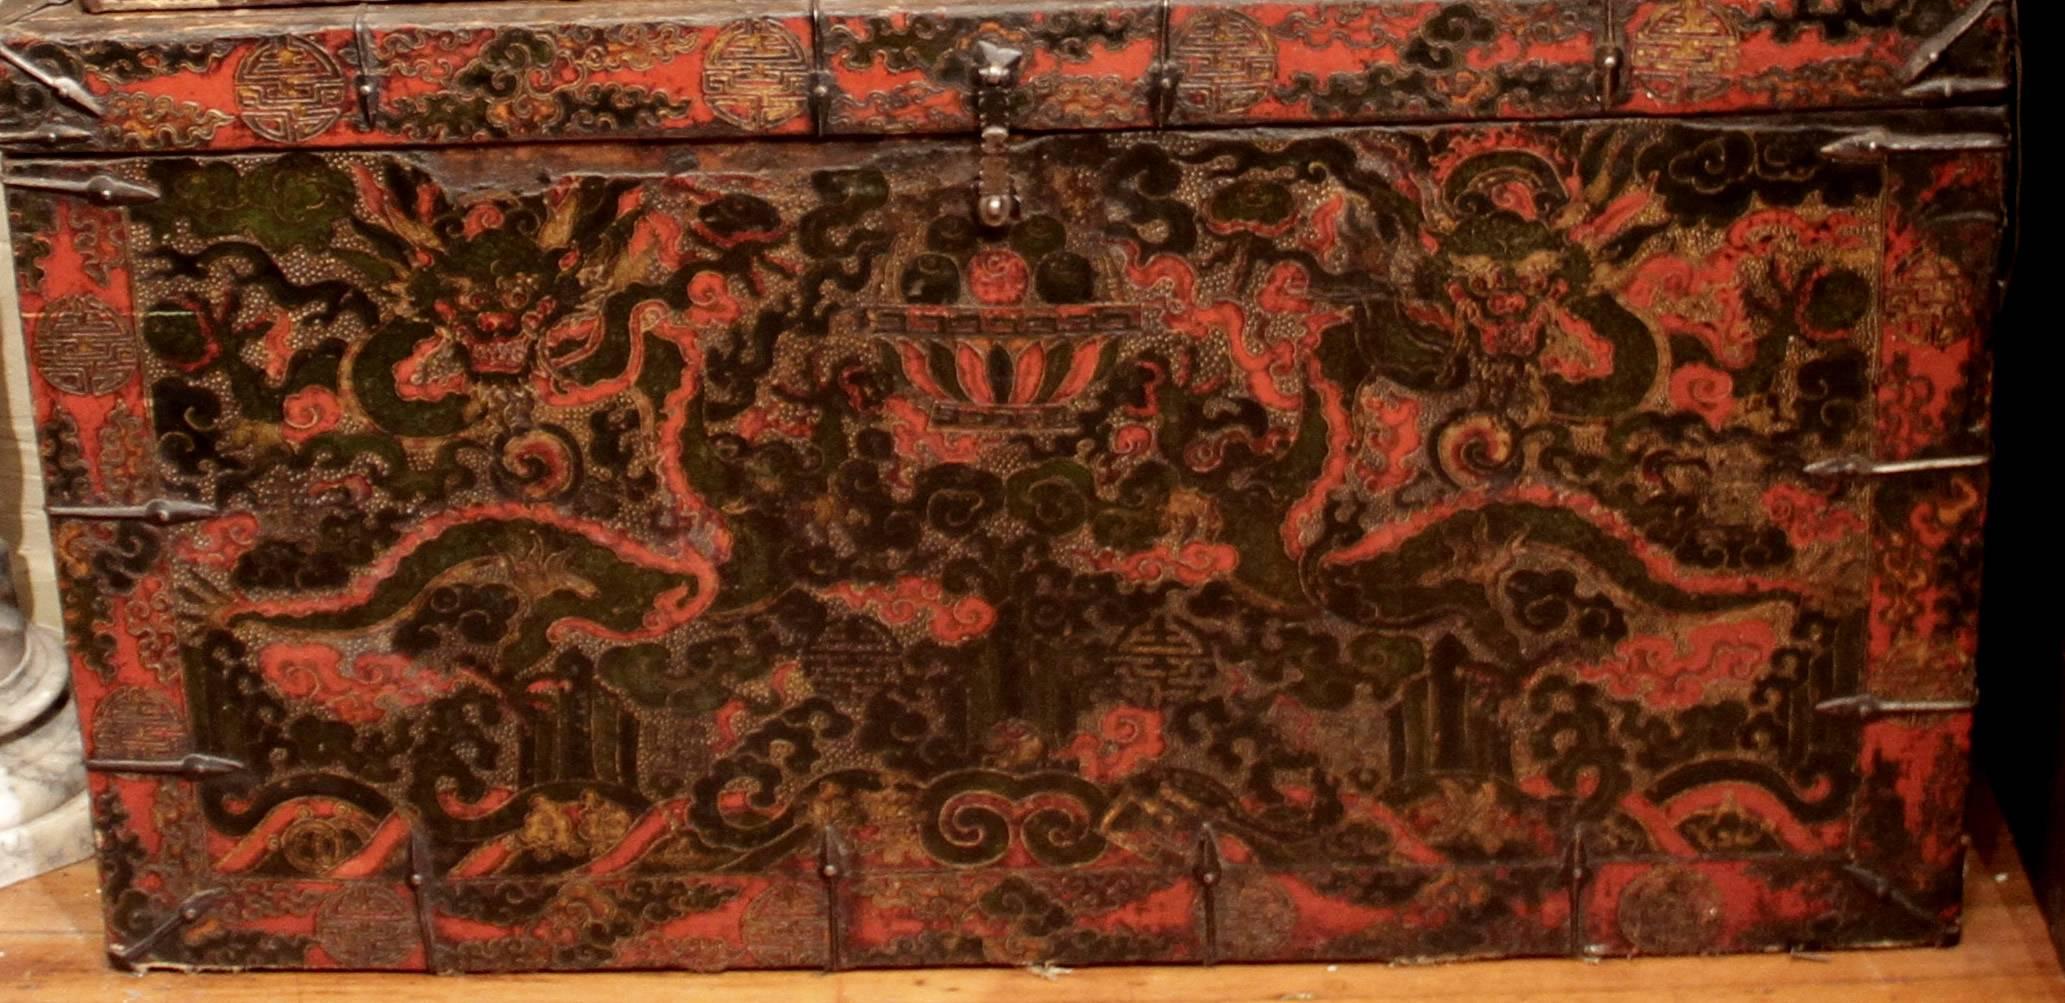 Mythical dragon Tibetan trunk in vibrant used for storing sacred religious objects. It has metal ornamentation and is a Gam Buddhist Monastery Trunk. It has lots of vibrant colors including red and black. Red and black trunks are rare and more